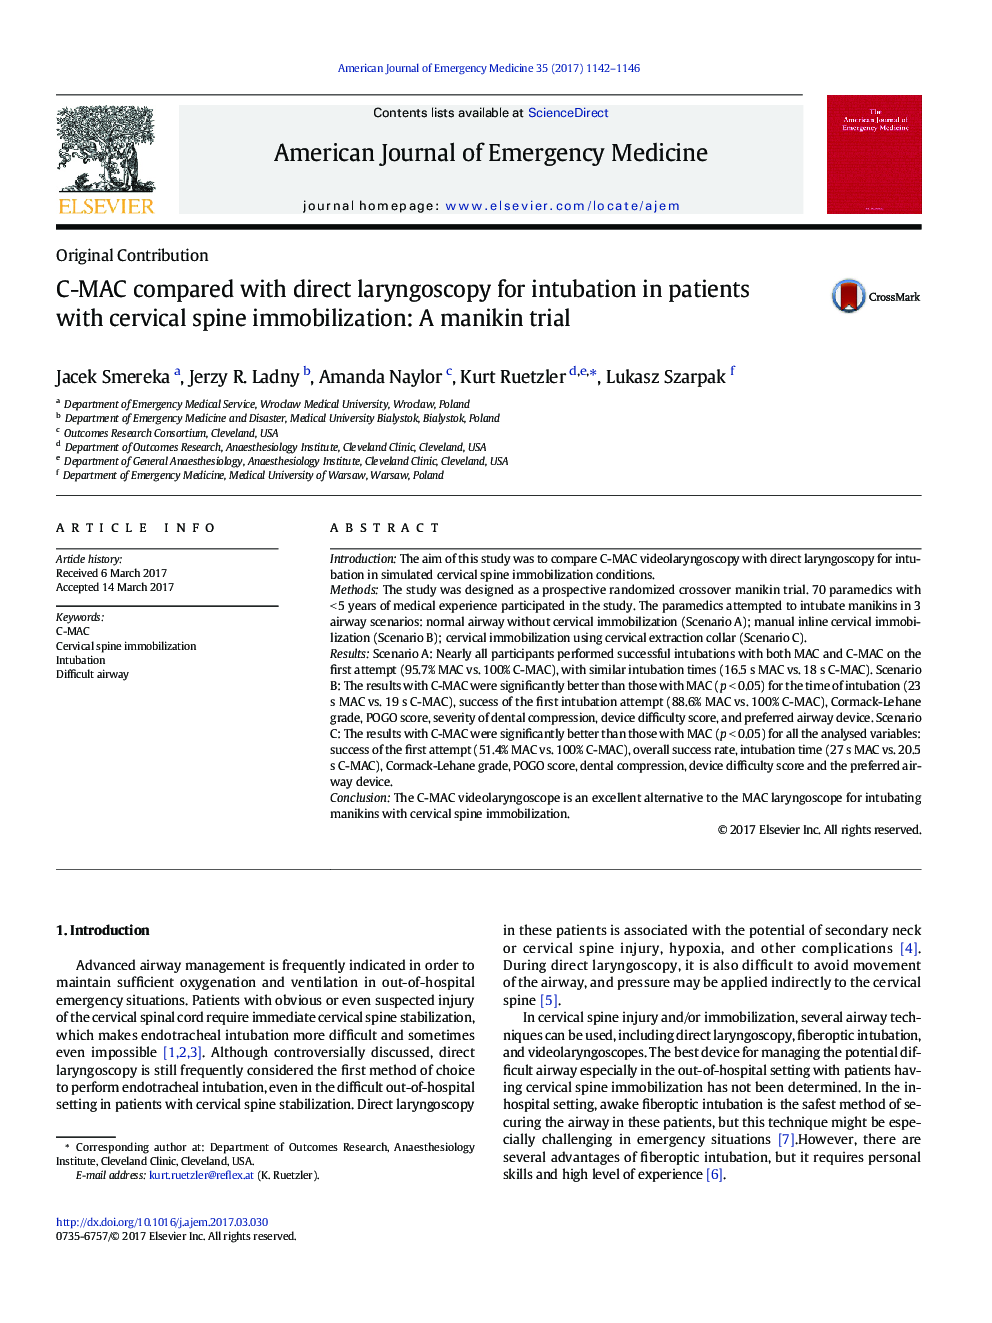 C-MAC compared with direct laryngoscopy for intubation in patients with cervical spine immobilization: A manikin trial